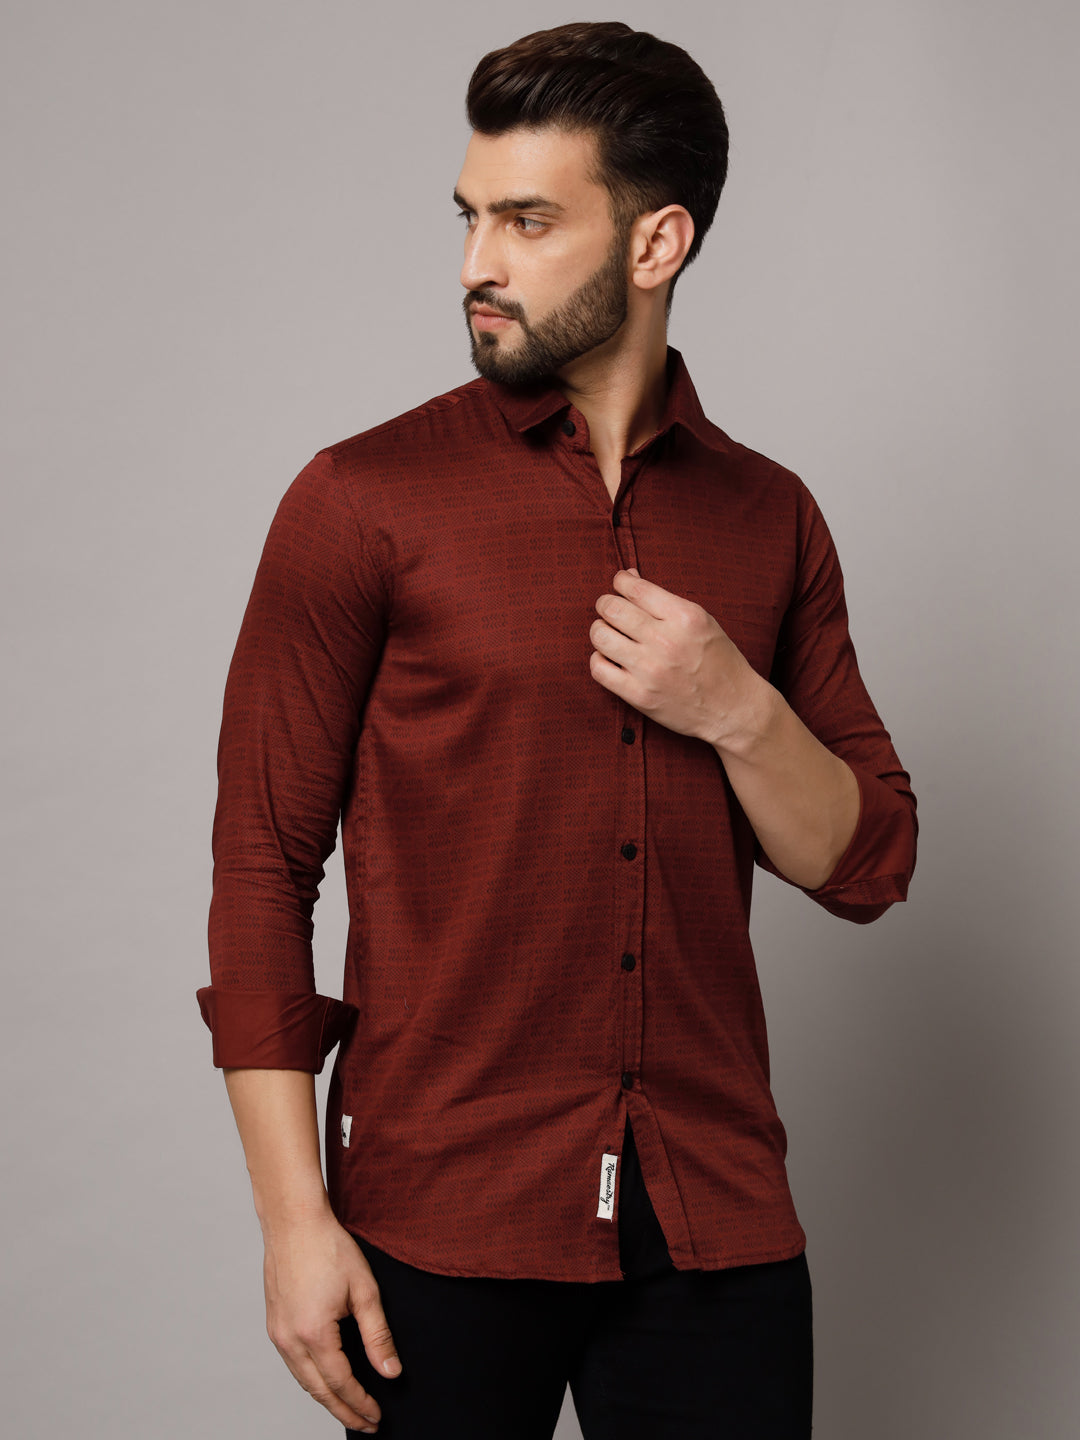 11 Maroon Pants Outfits Ideas For Men To Have Stylish Look